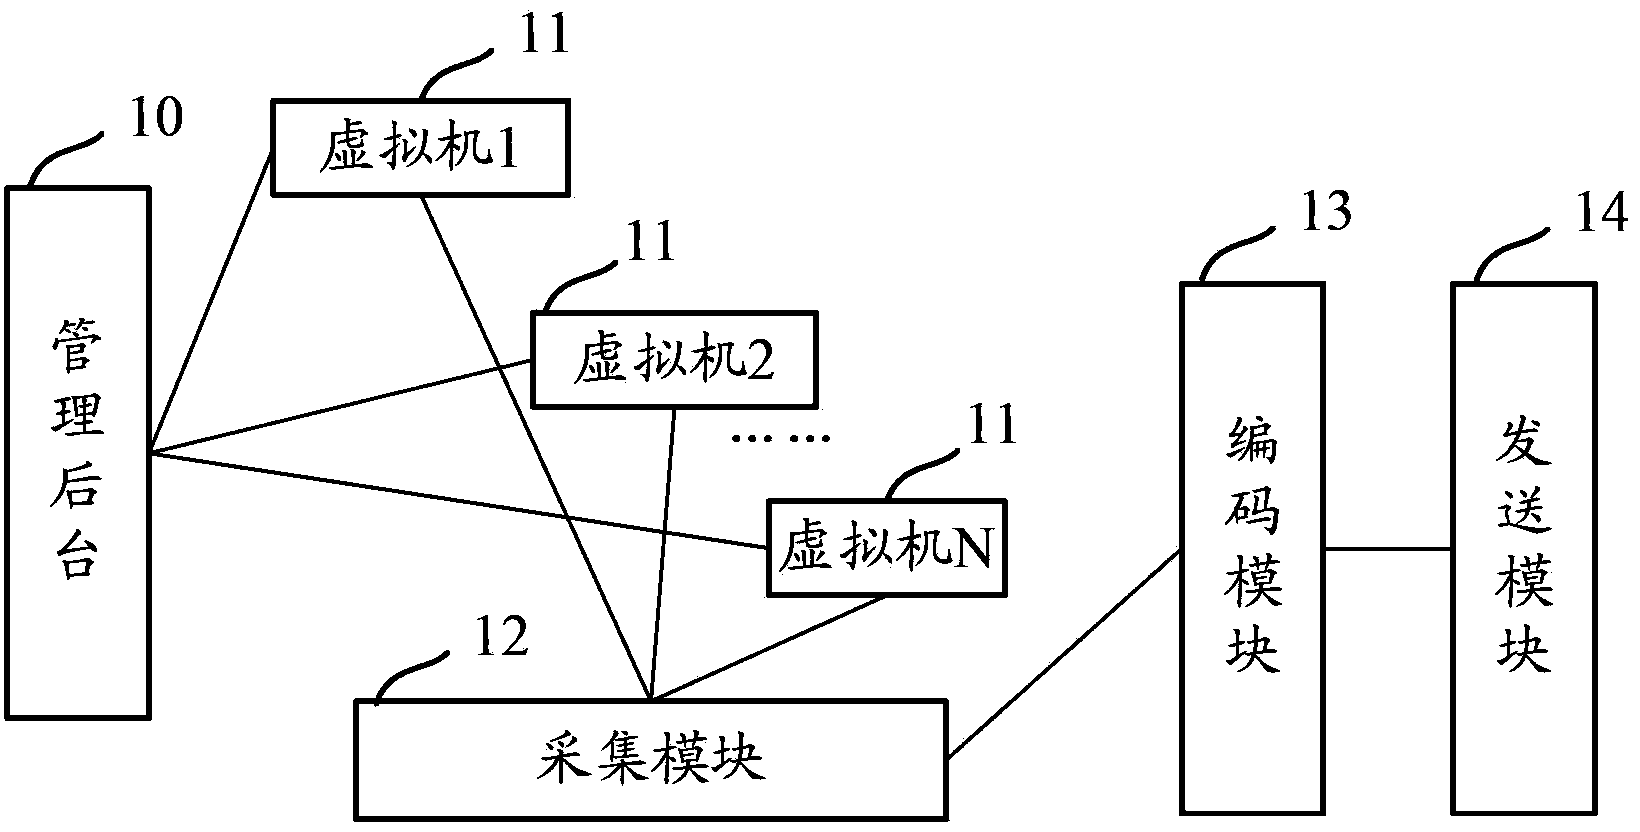 Application data supplying method, device and system based on virtual machine